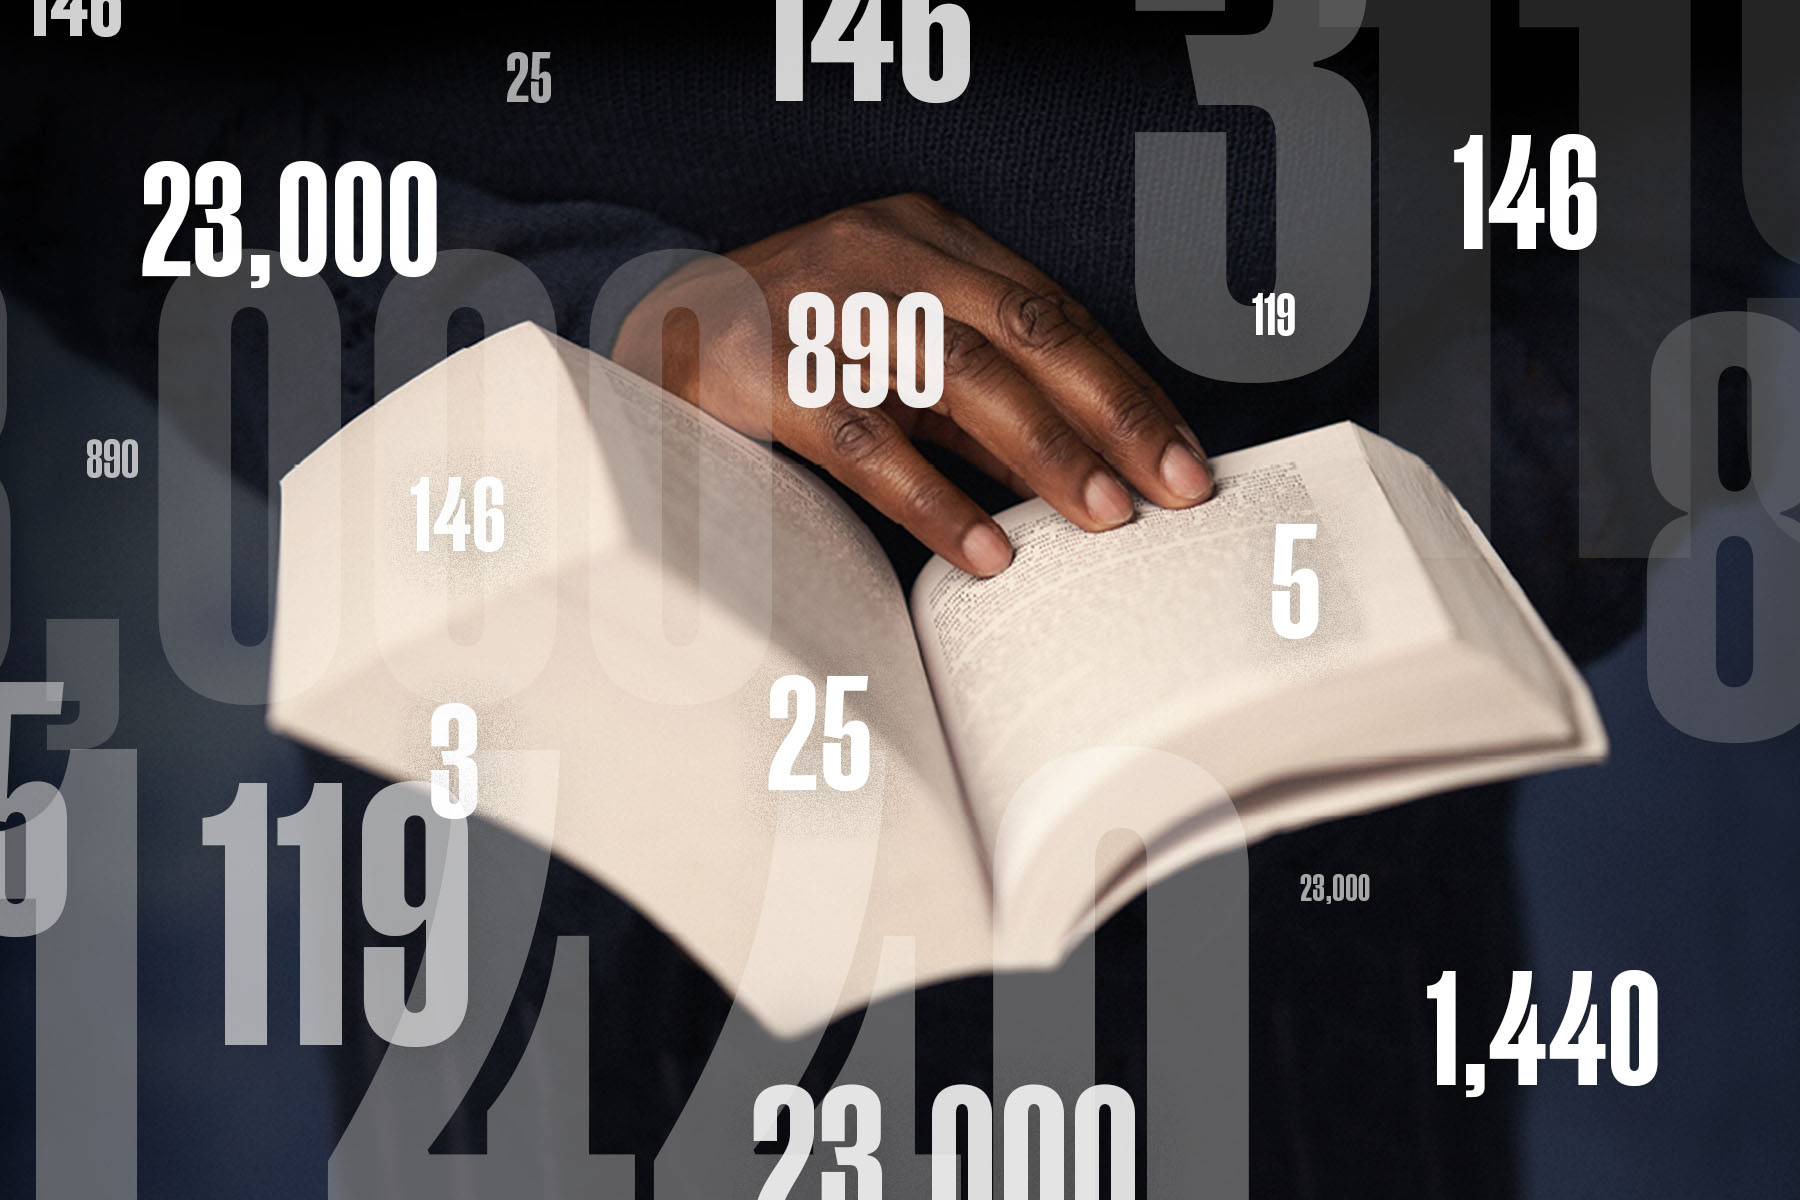 the year in book numbers